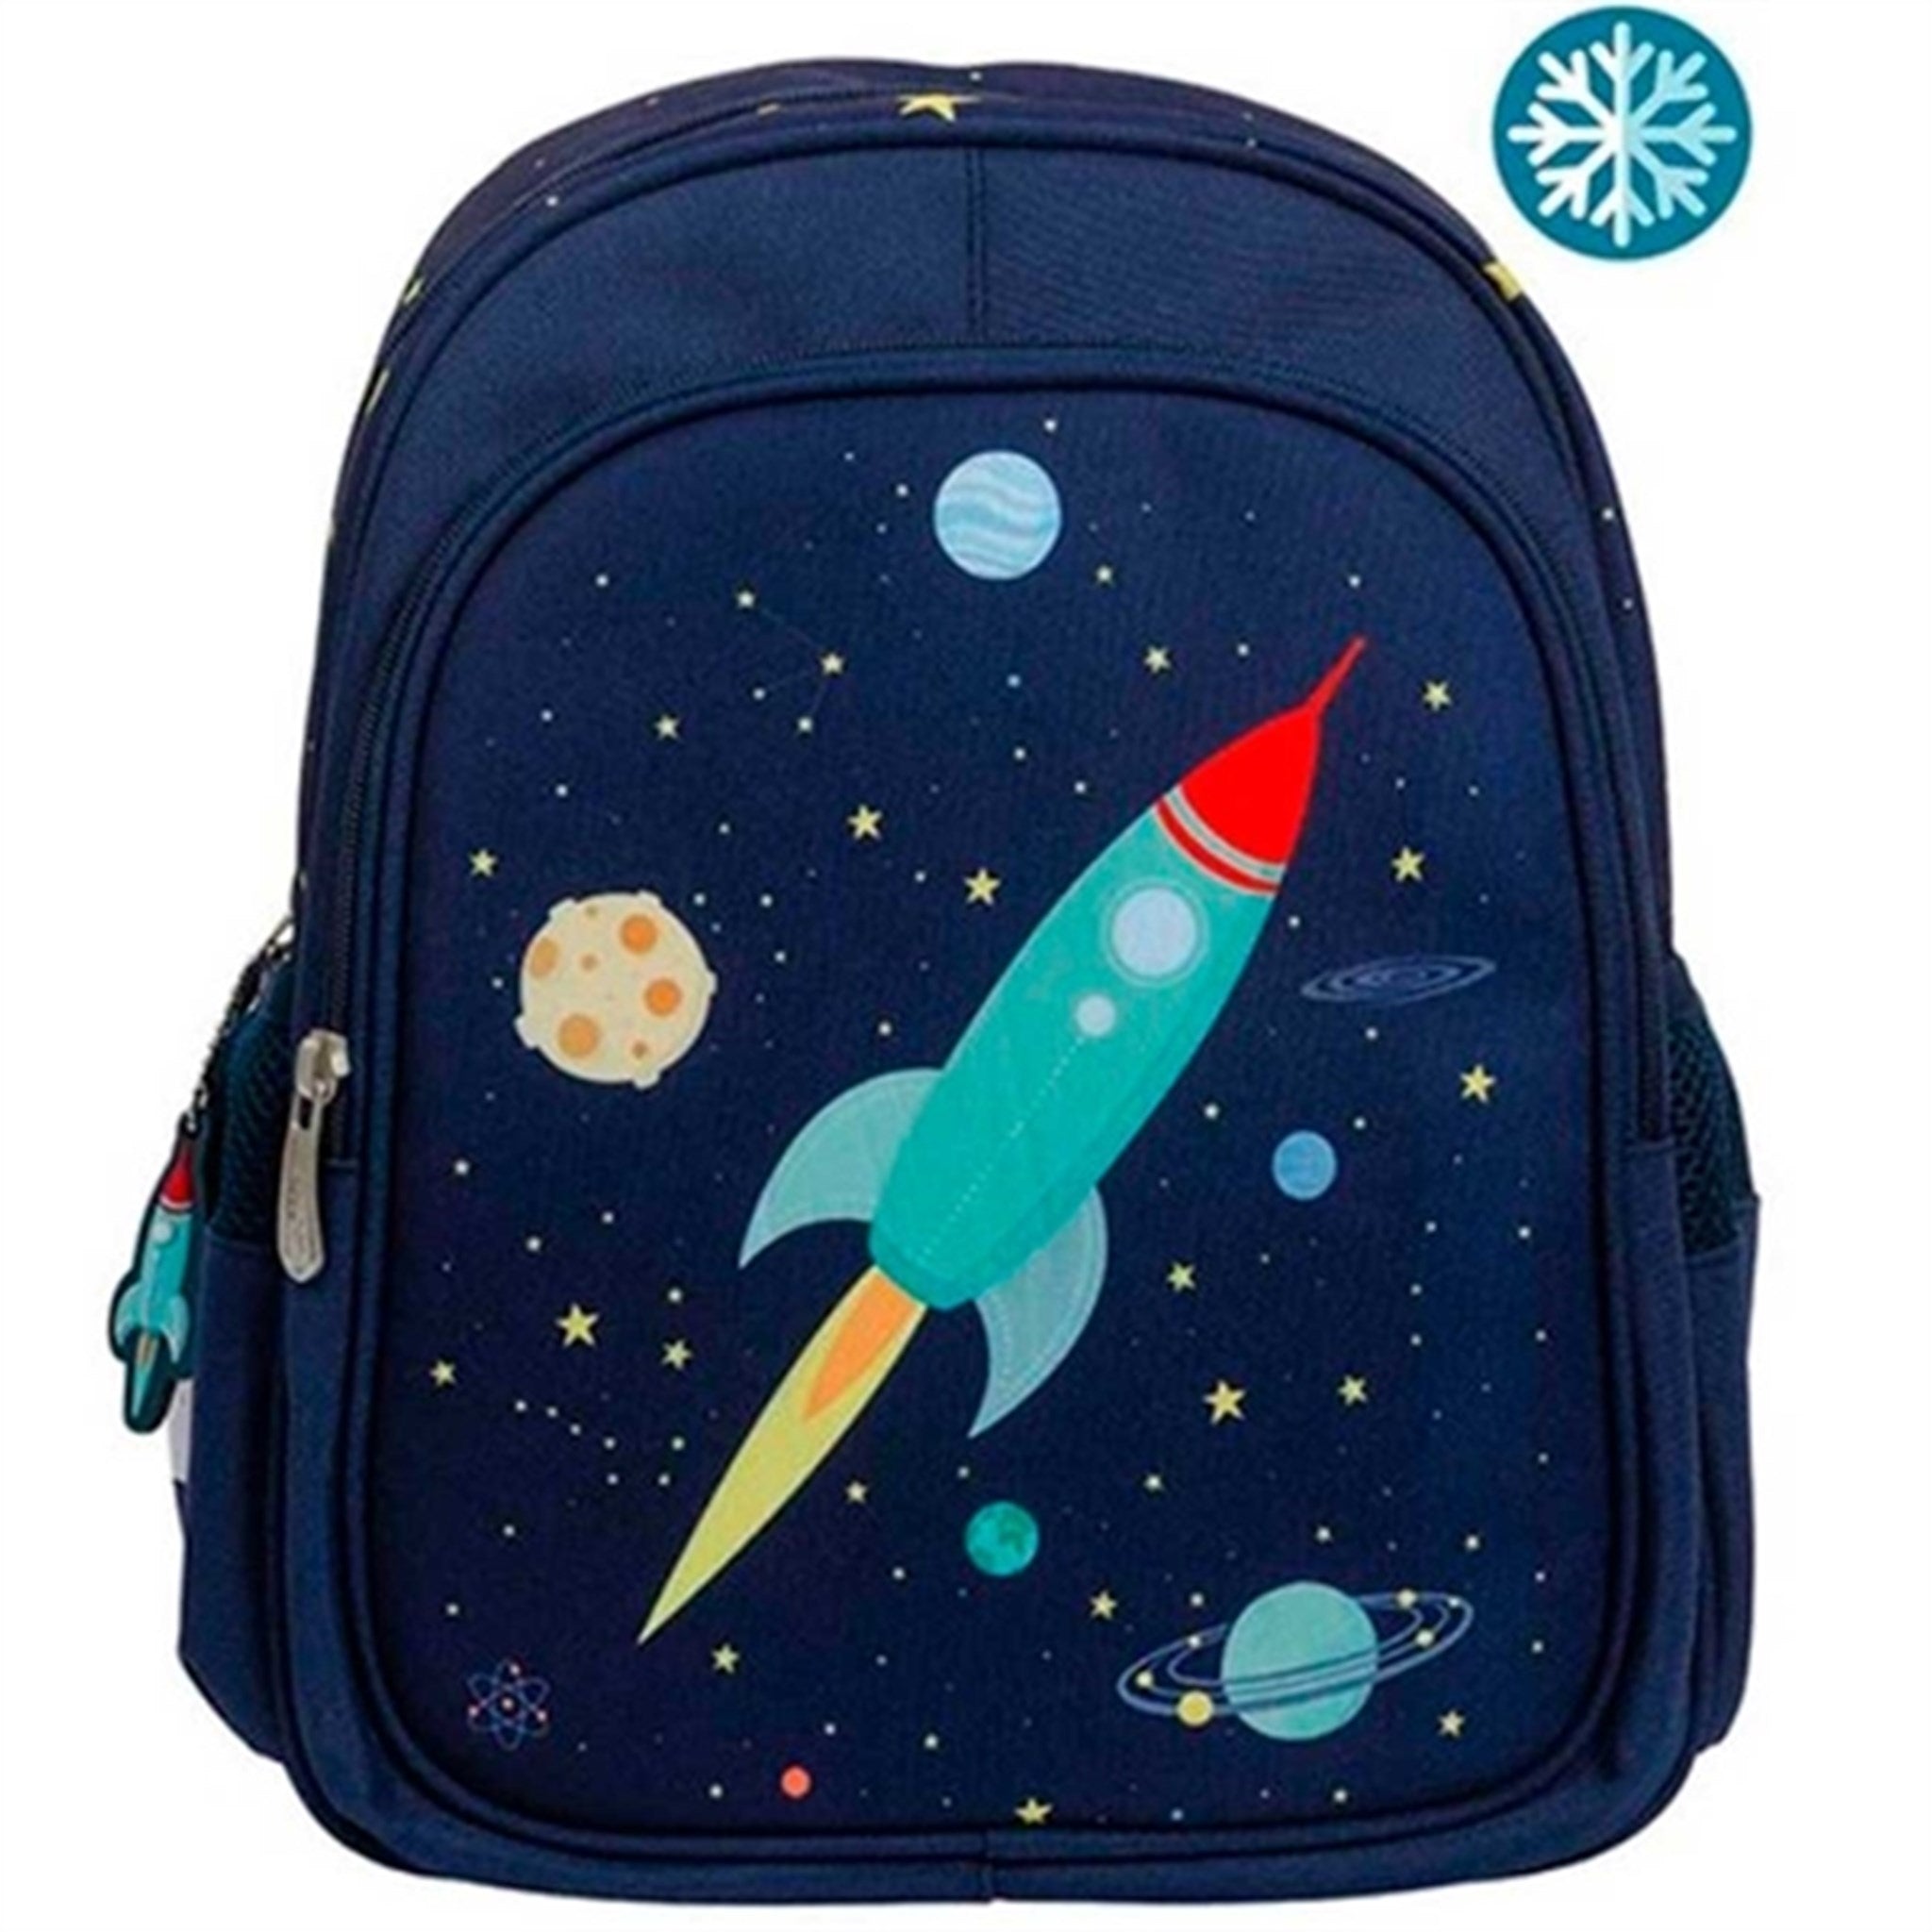 A Little Love Company Backpack Space